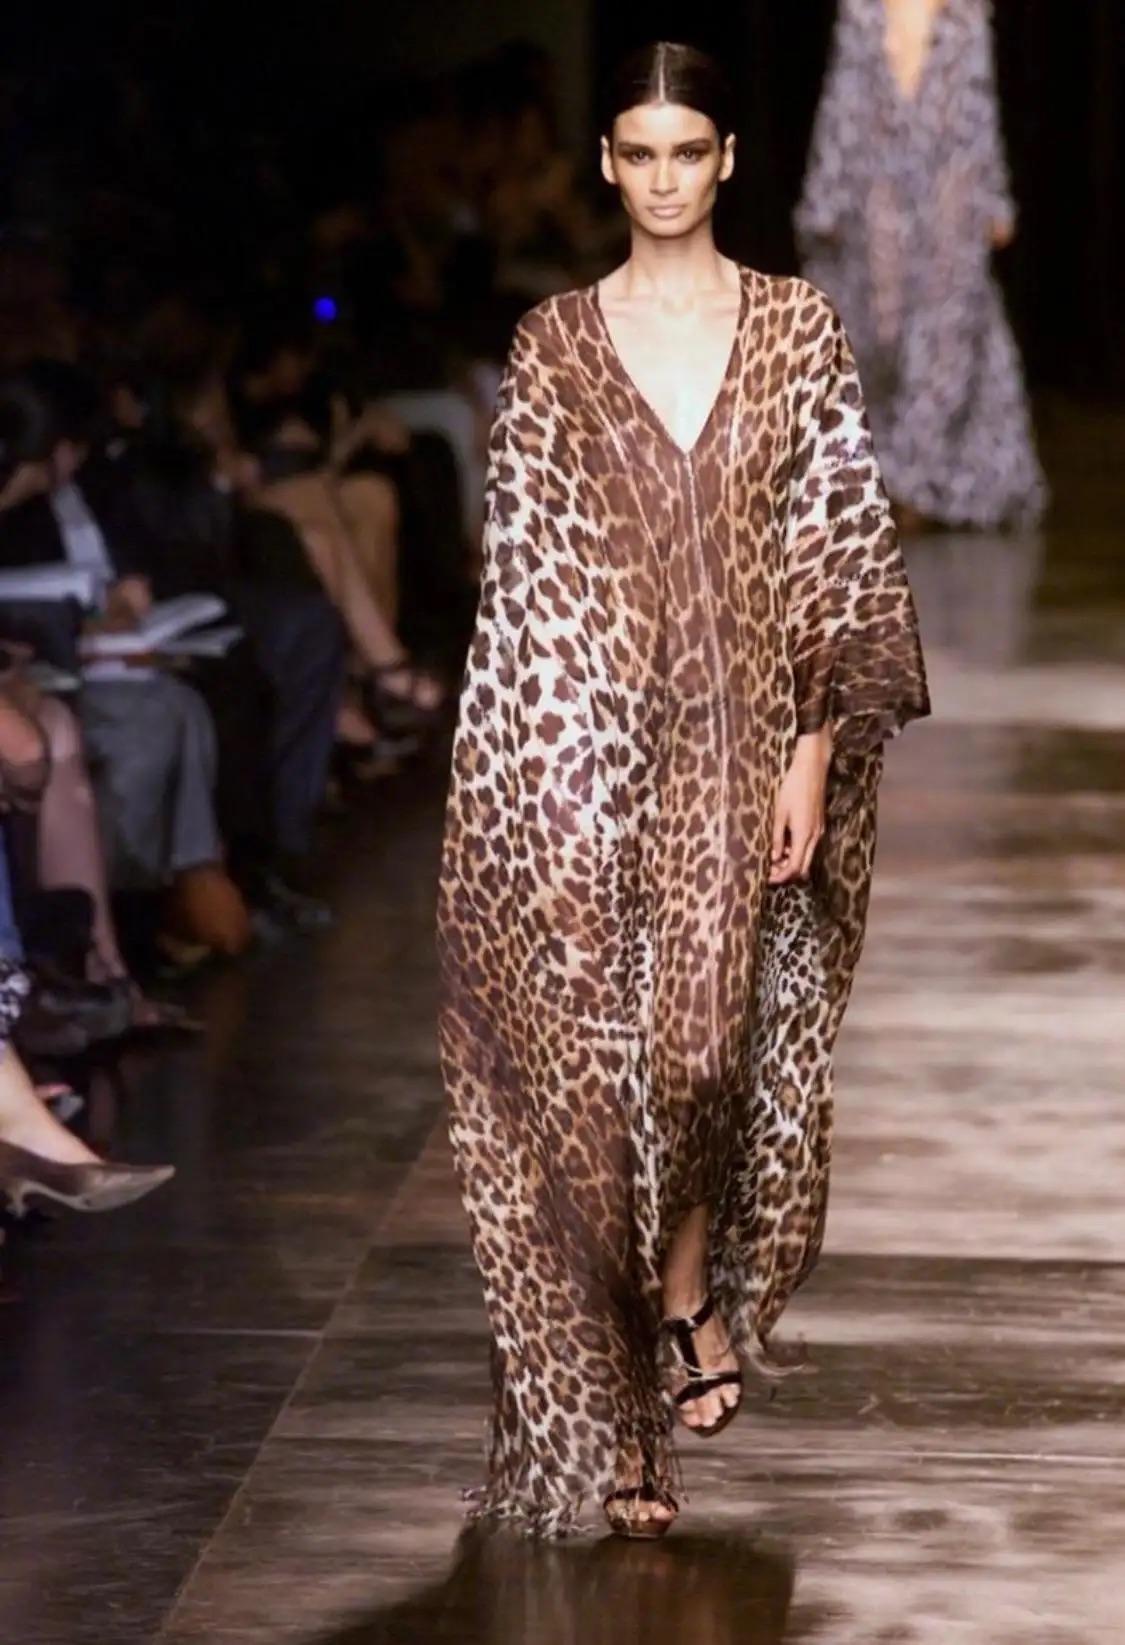 Introducing a striking leopard print gown from the Yves Saint Laurent Rive Gauche collection, designed by Tom Ford for the Spring/Summer 2002 season. This gown features a plunging cowl neckline, an open back, and an impressive train. The abundance